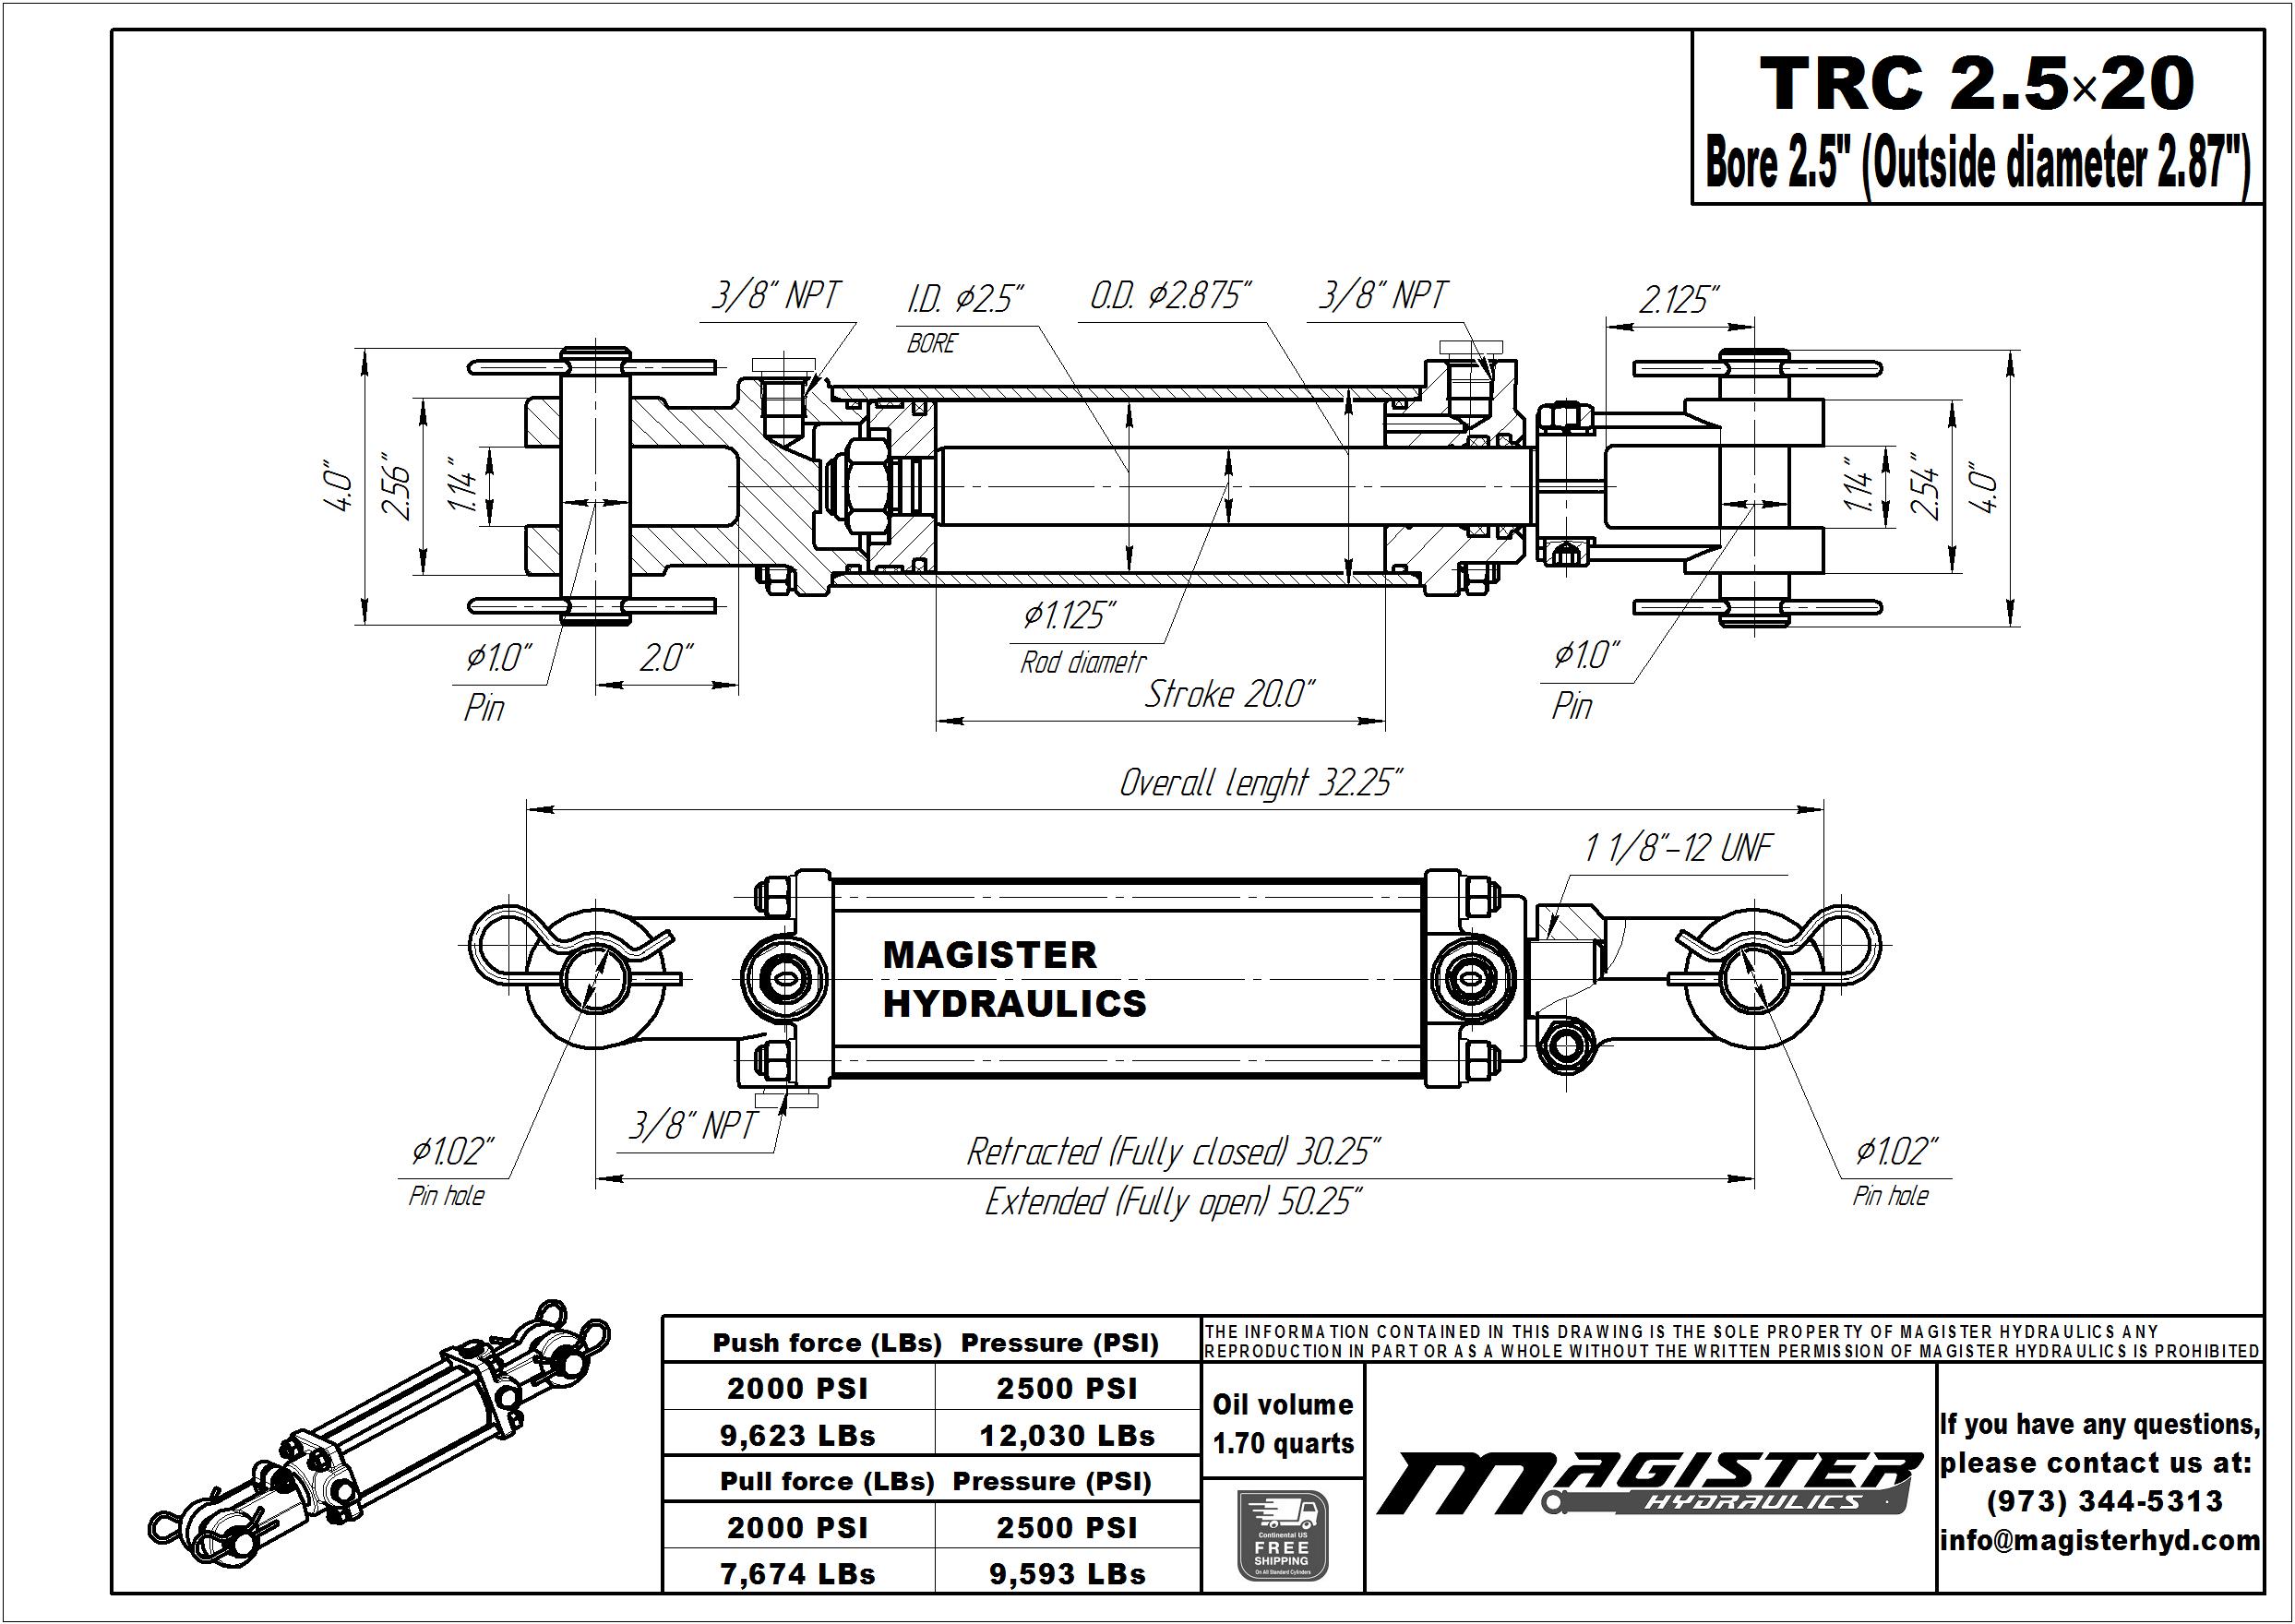 Stroke Bore and 8 in WEN TR2008 2500 PSI Tie Rod Hydraulic Cylinder with 2 in